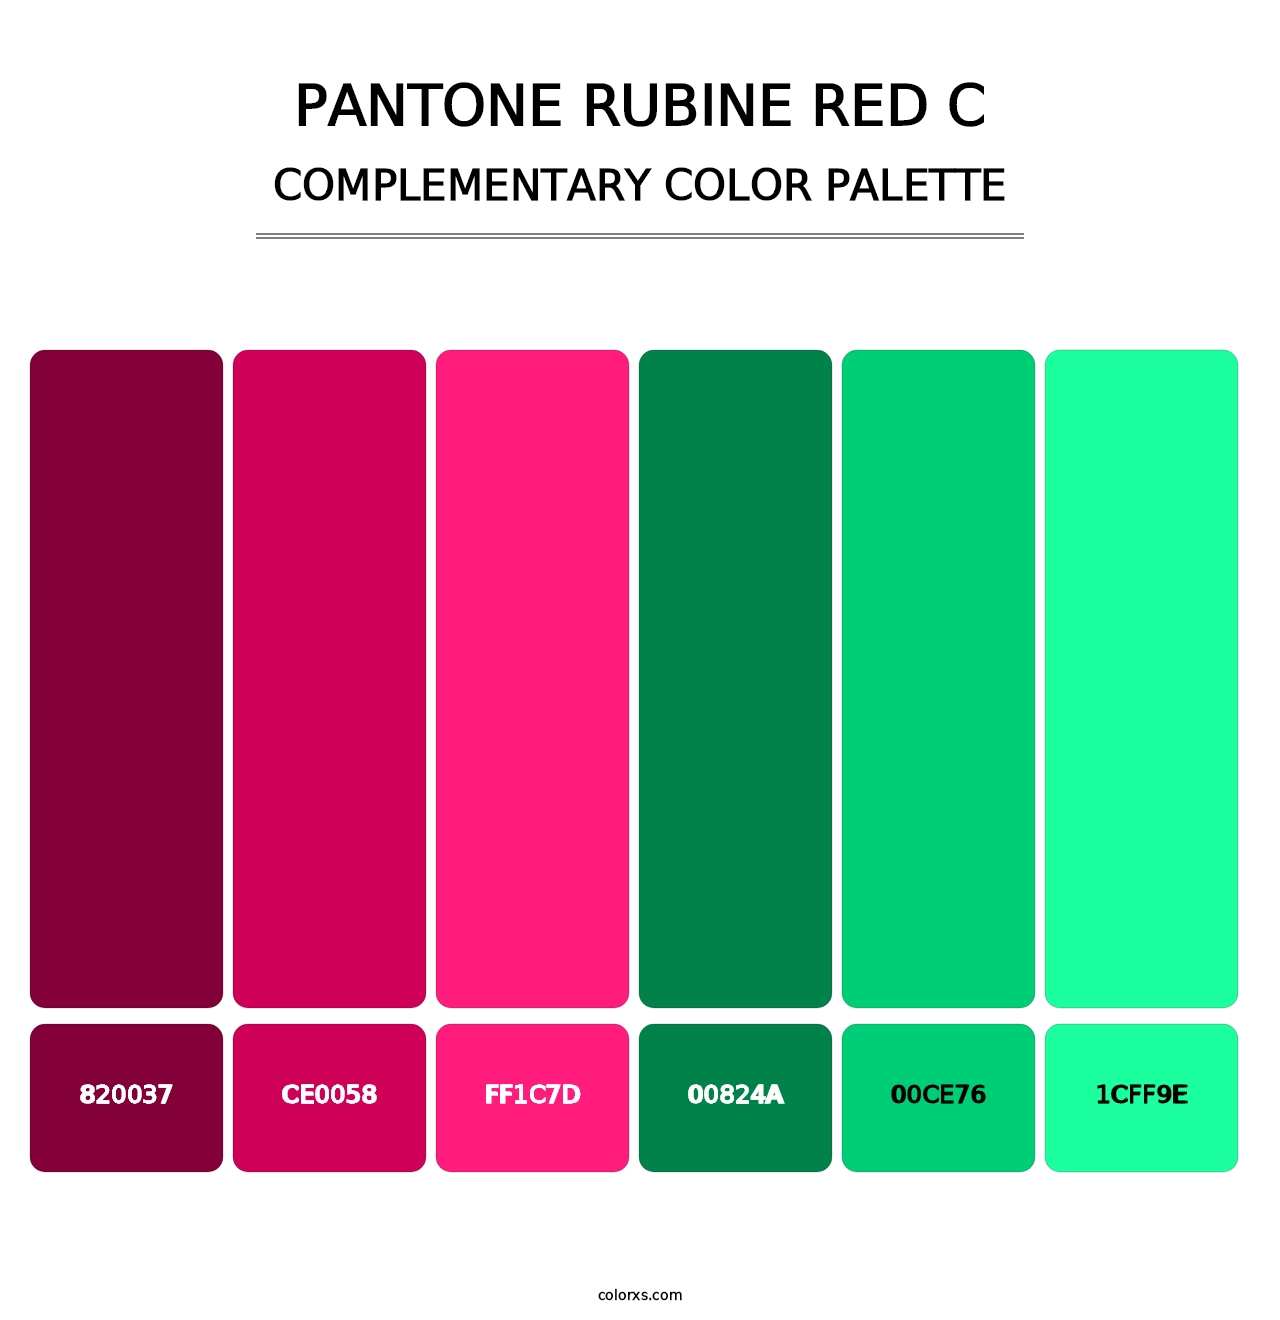 PANTONE Rubine Red C - Complementary Color Palette